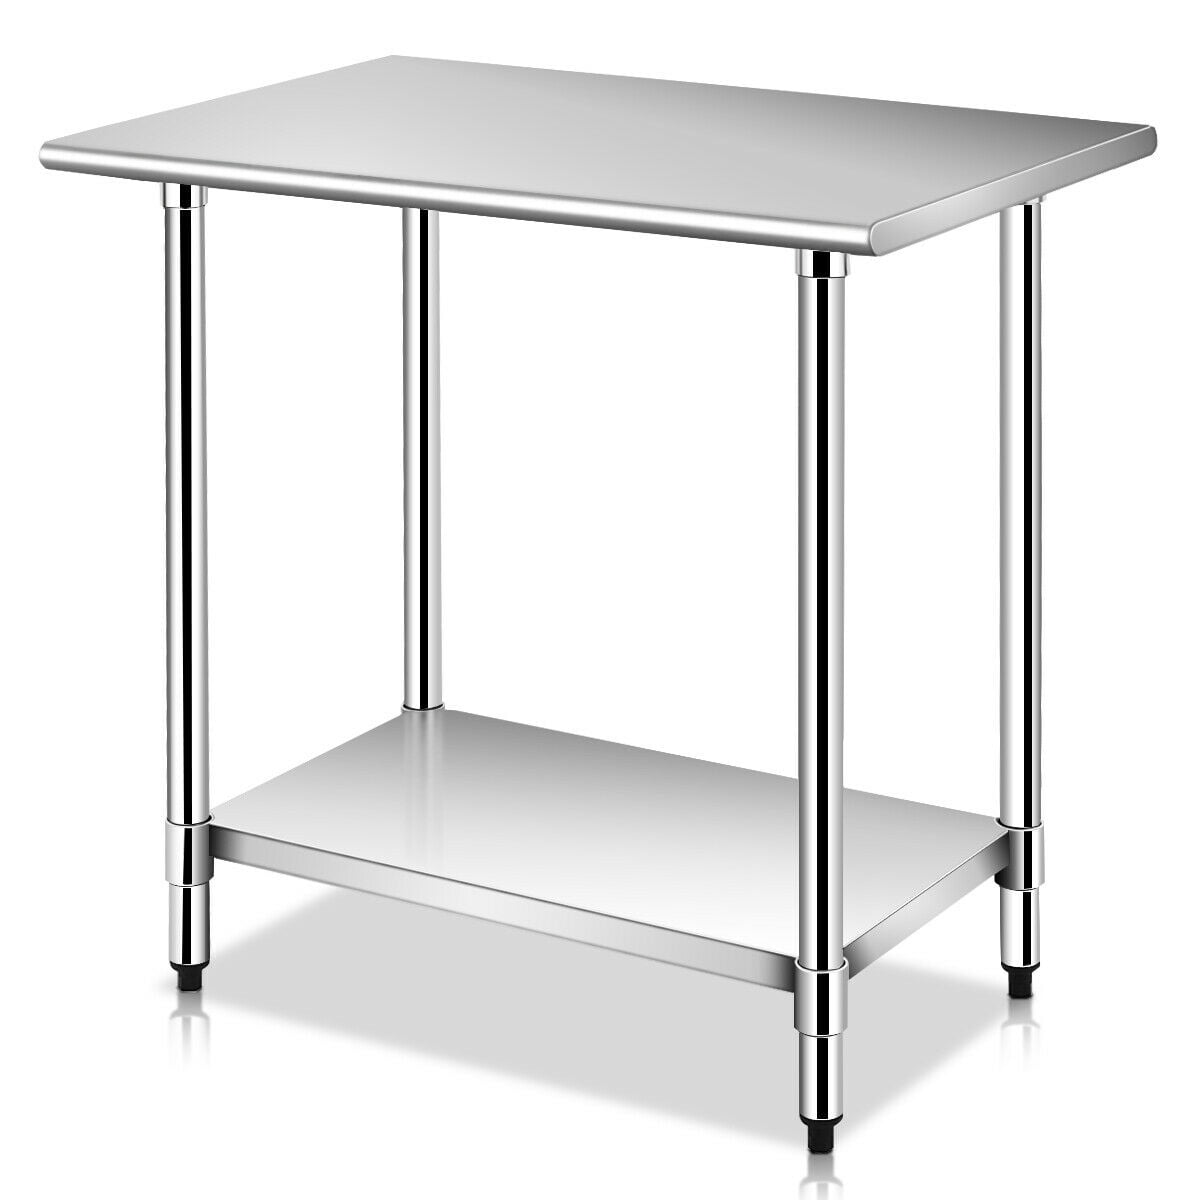 Stainless Steel Work Table 36x24x36 Inches Heavy Duty Prep Commercial Grade Kitchen Table with Adjustable Under Shelf and Table Foot for Restaurant Kitchen Home Warehouse and Hotel 